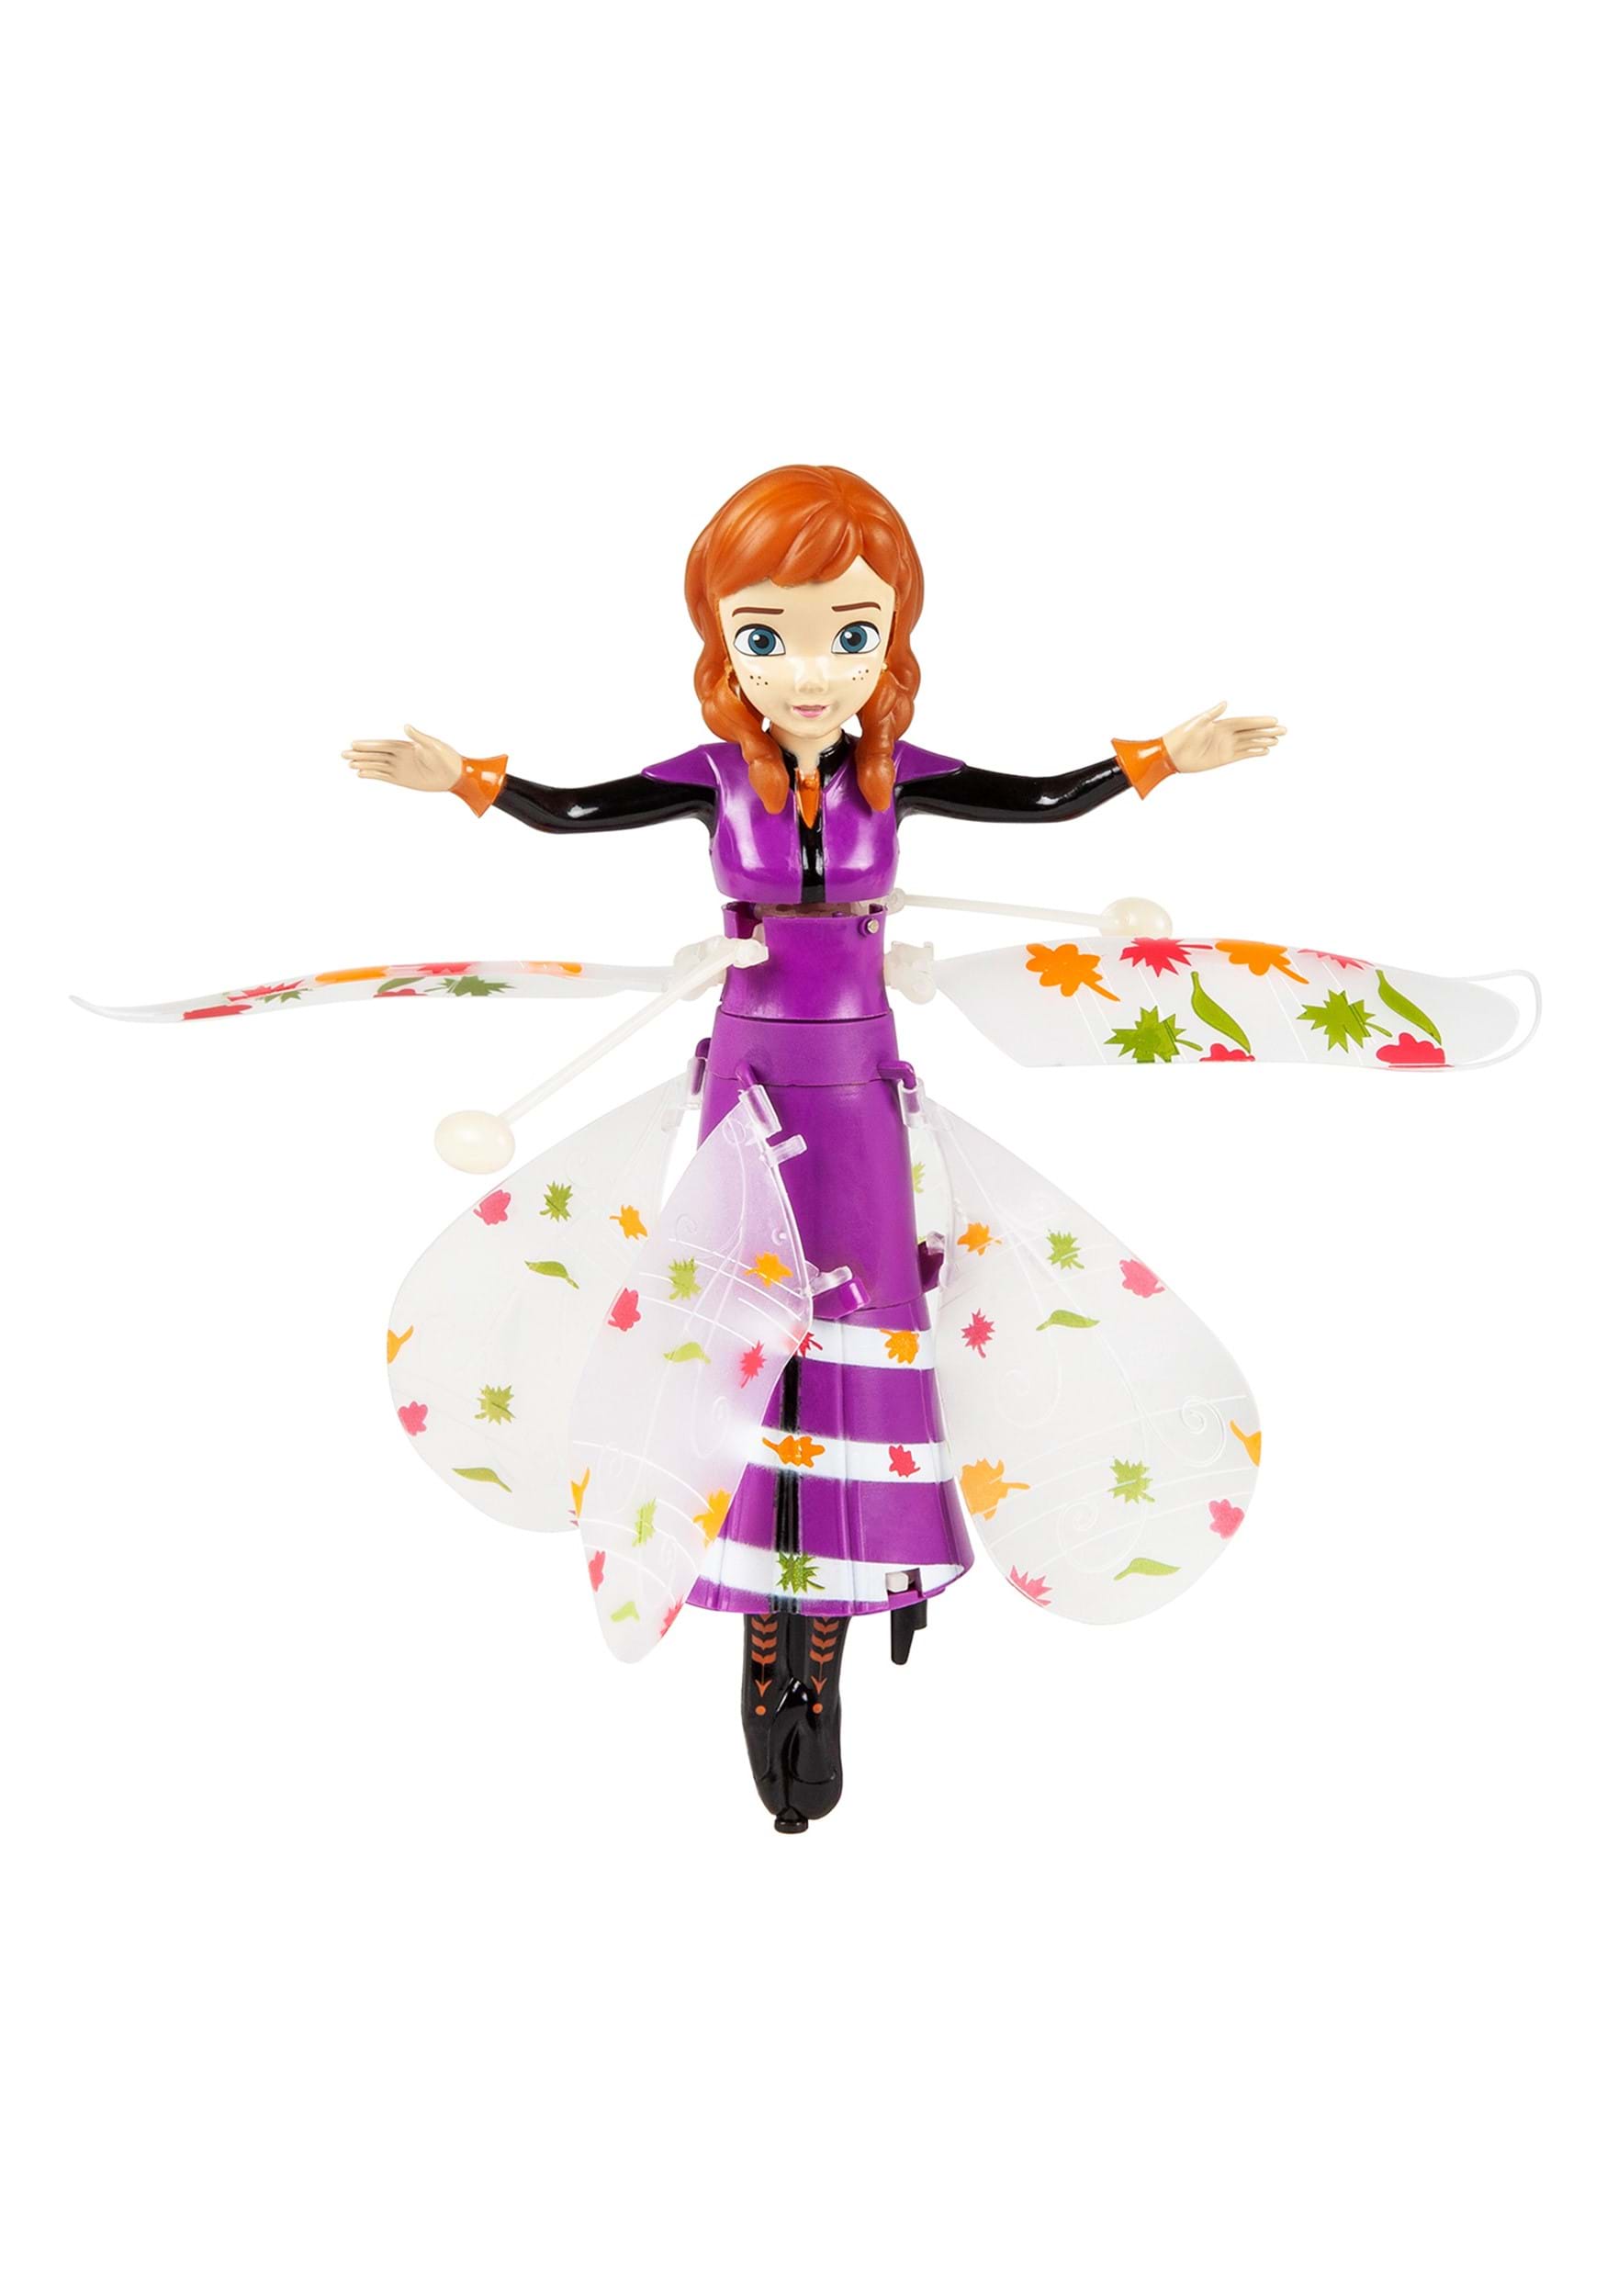 Disney Frozen Anna Motion Sensing 7.5 Inch Remote Control Helicopter